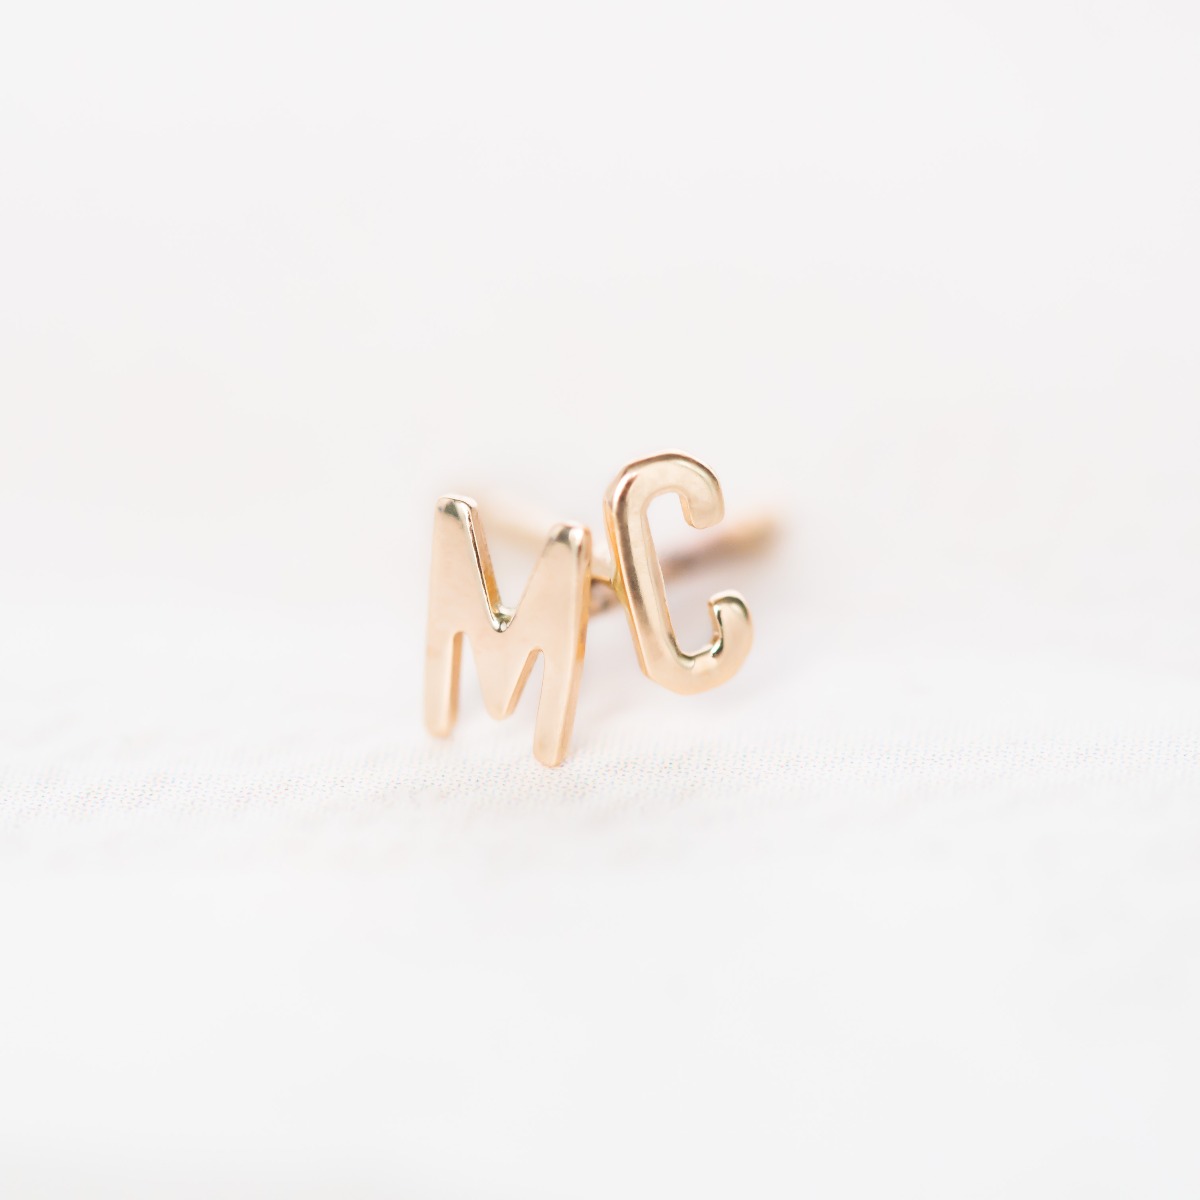 Dainty Initial Stud Earrings in 14k (White or Yellow Gold)